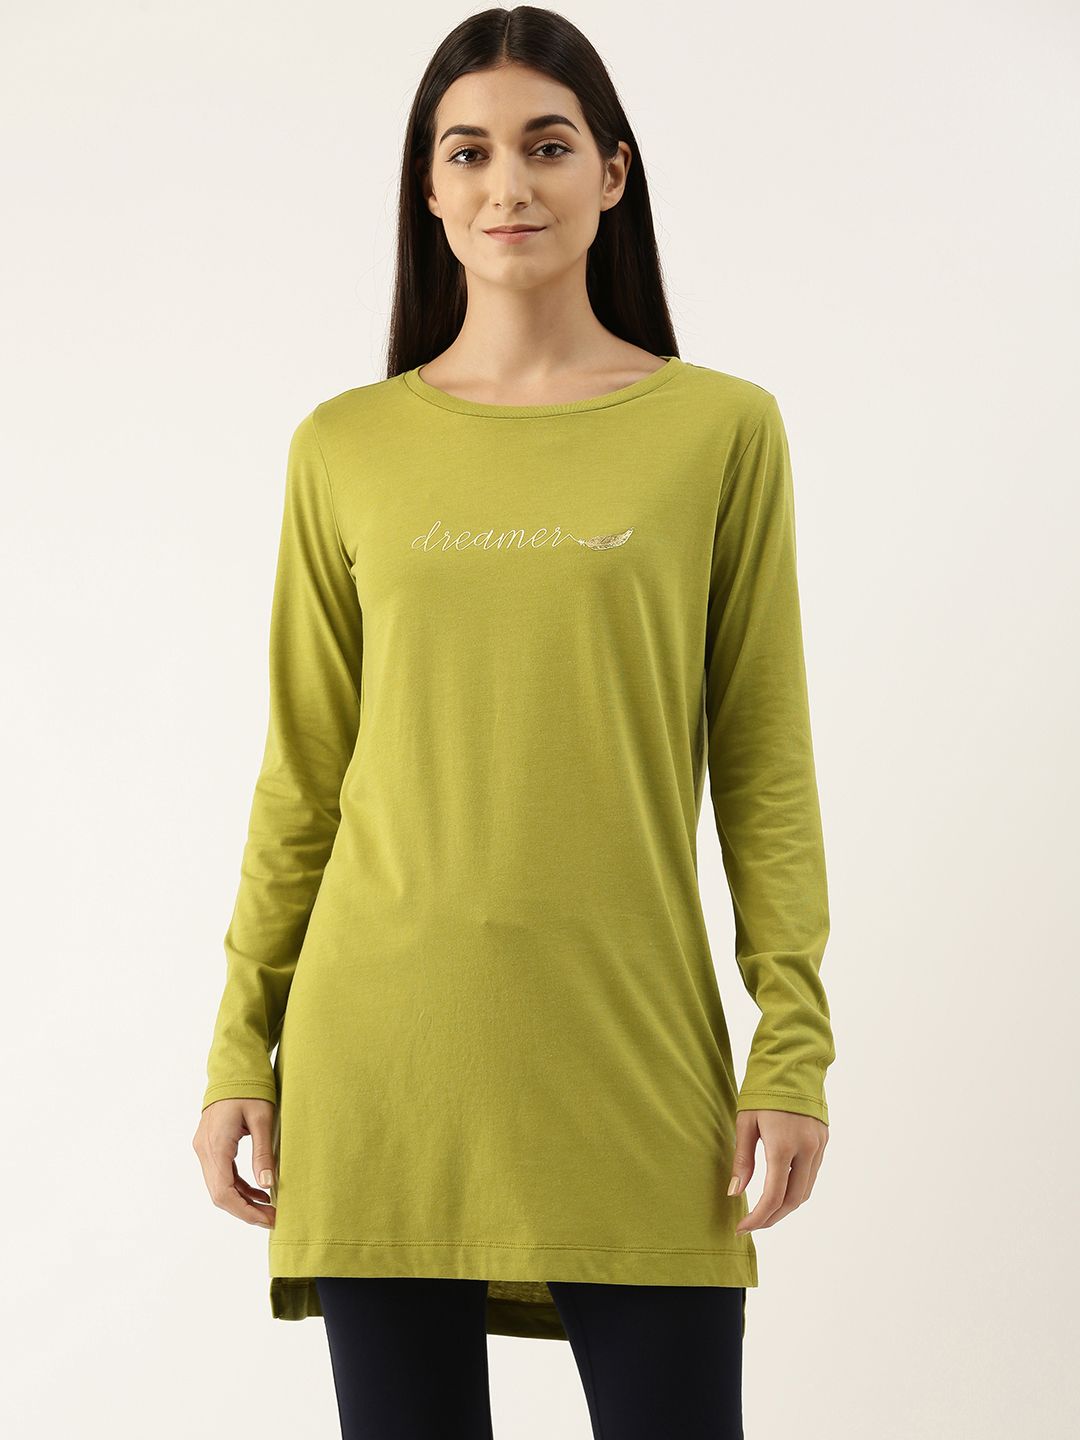 Enamor Womens Lime Green Essential Long Sleeve Cotton Tunic Tee Price in India